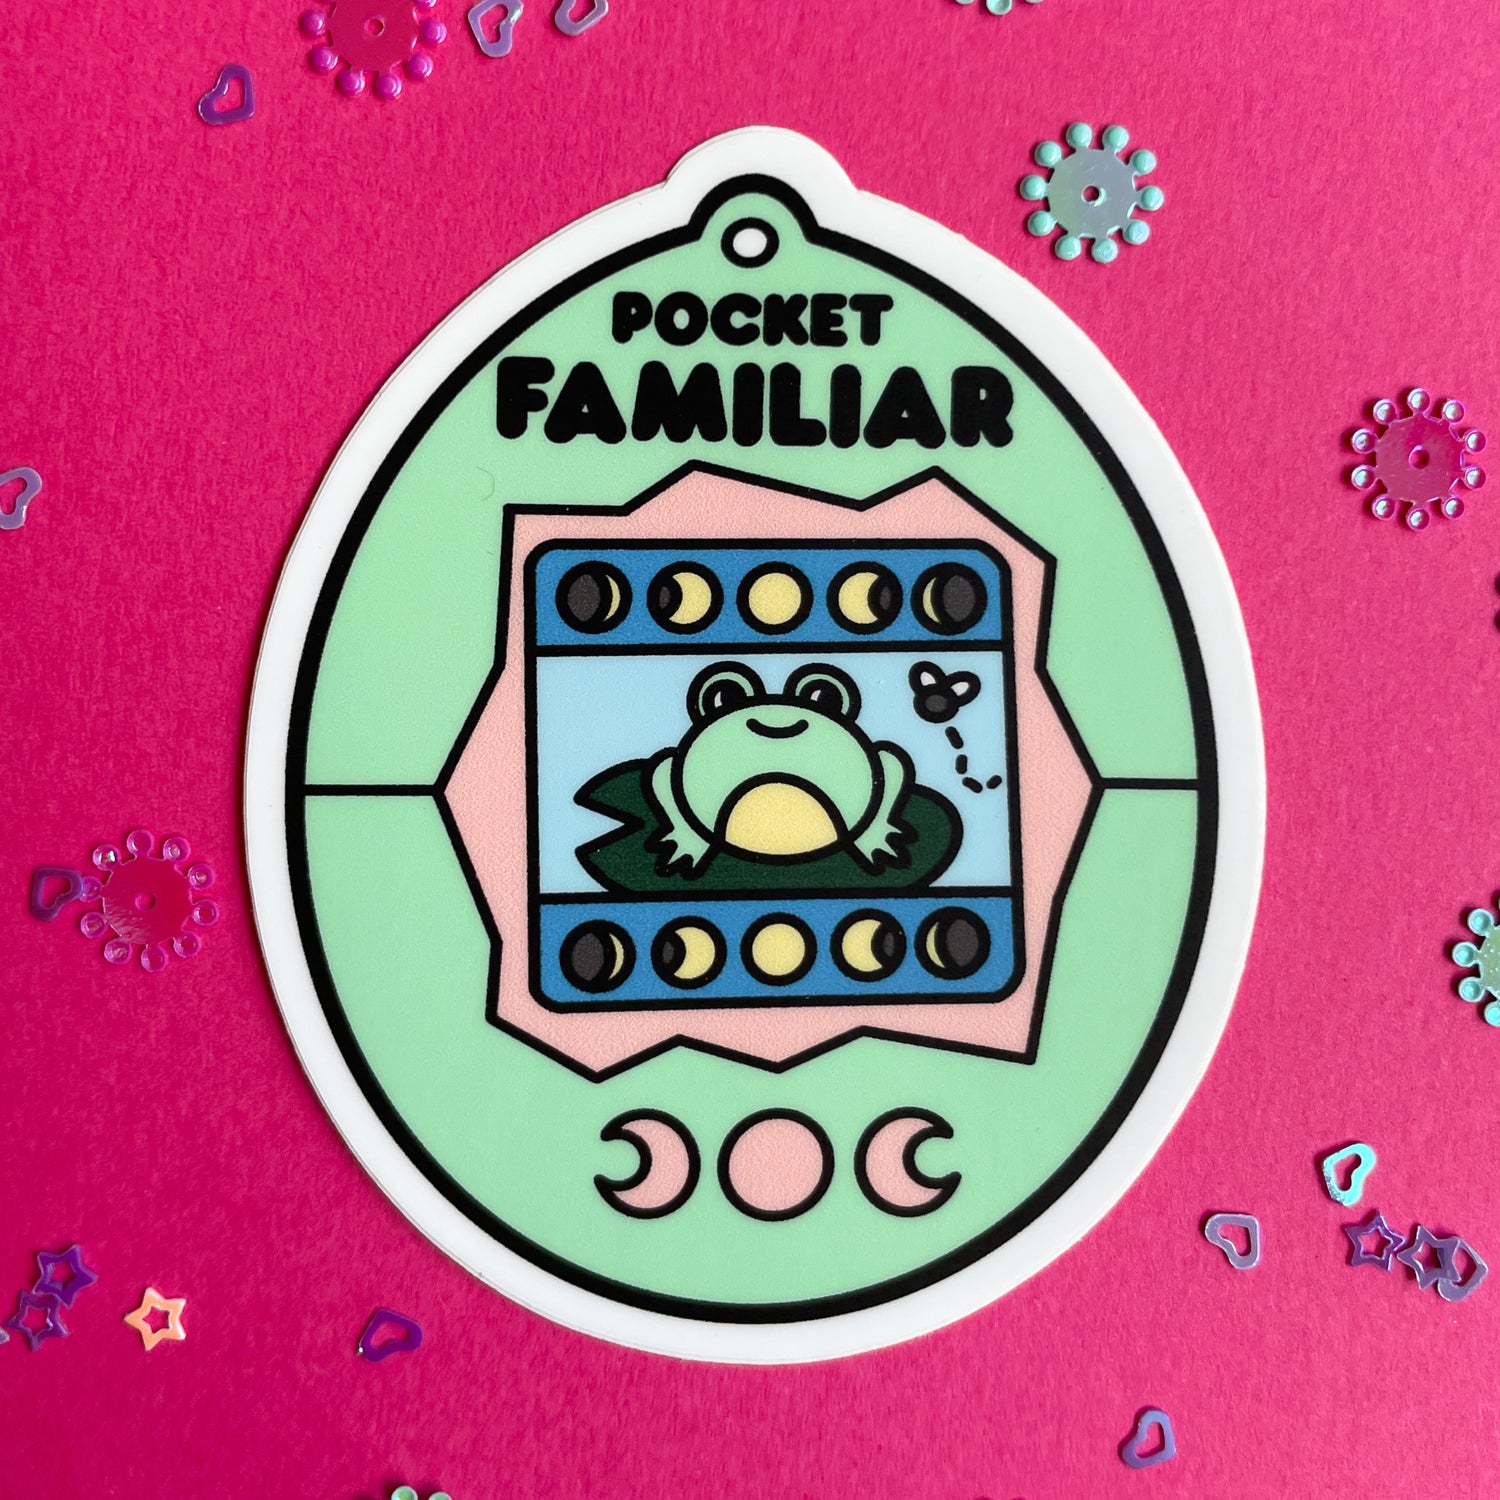 A vinyl sticker shaped like a virtual pet with a frog on the screen that has a mint and peach colored shell. The sticker is on a hot pink paper background.